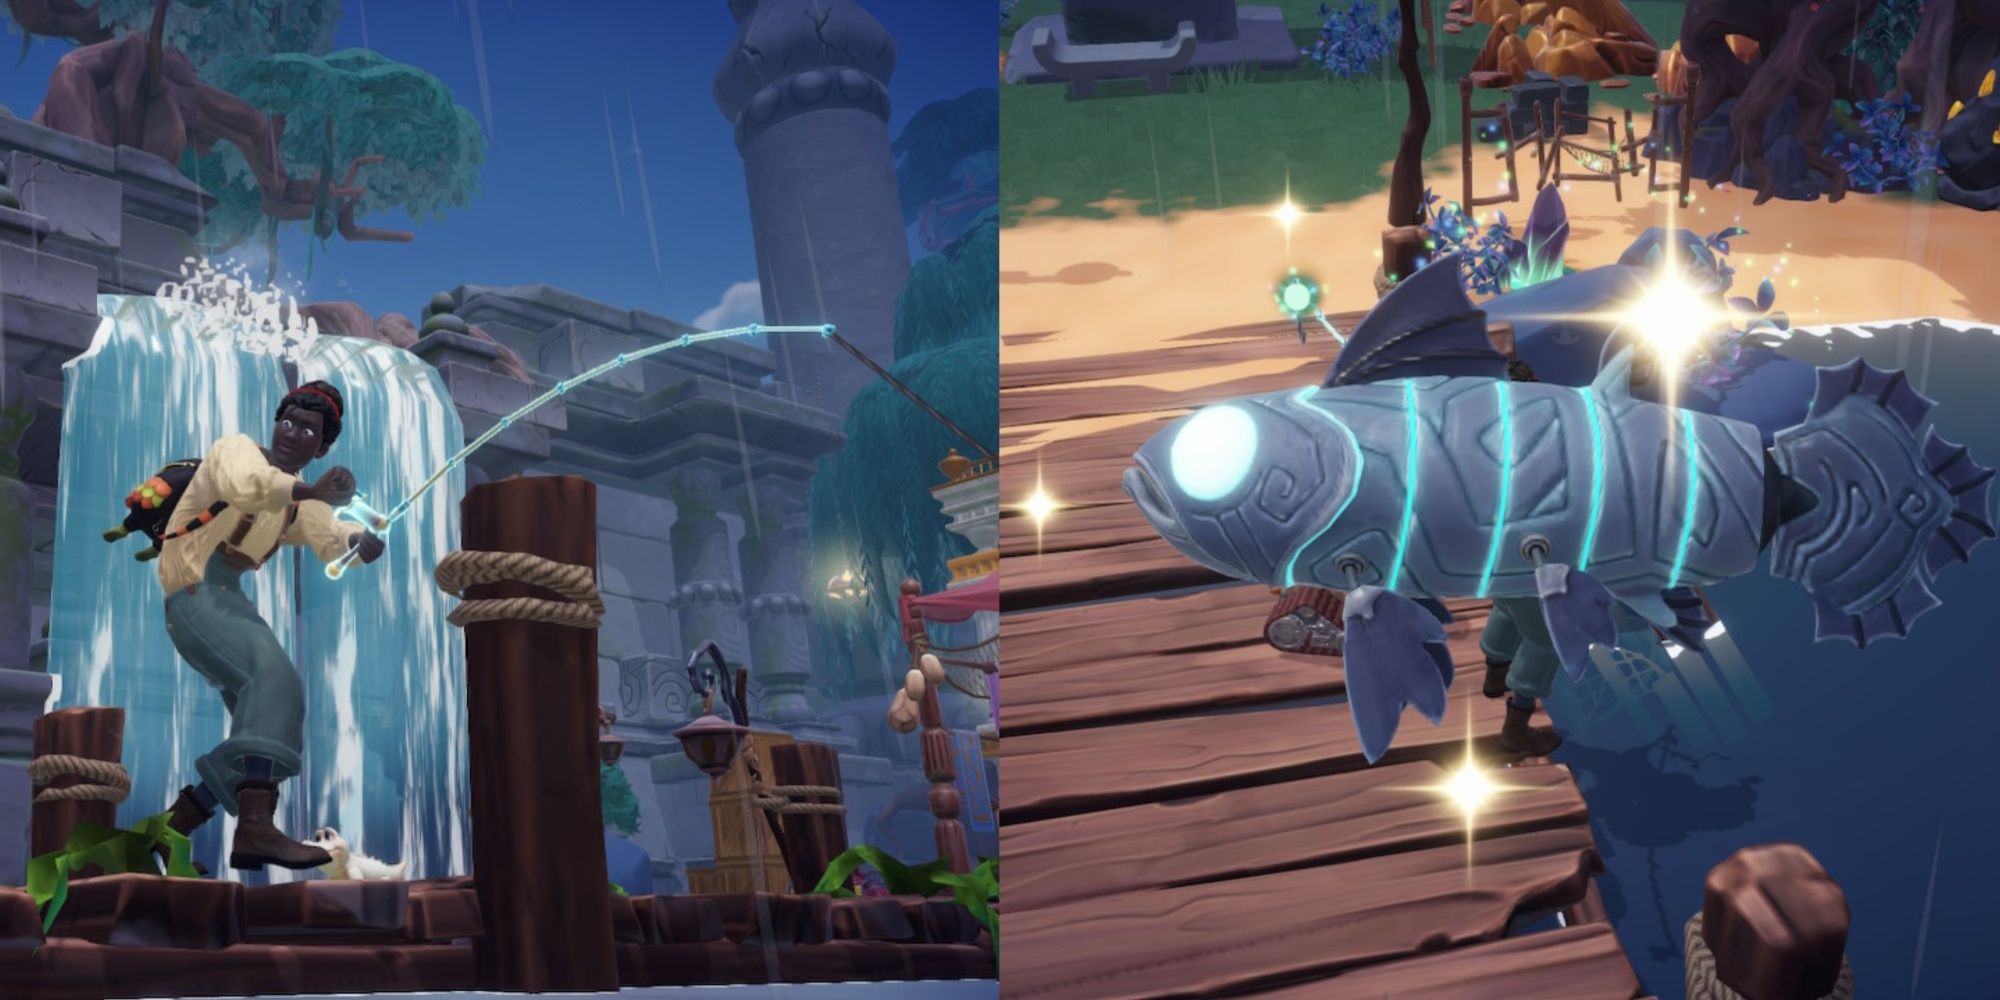 Split image featuring a player character with an elixir on their rod in the middle of pulling a fish, and a Robot Fish sparkling after being caught in Disney Dreamlight Valley. 